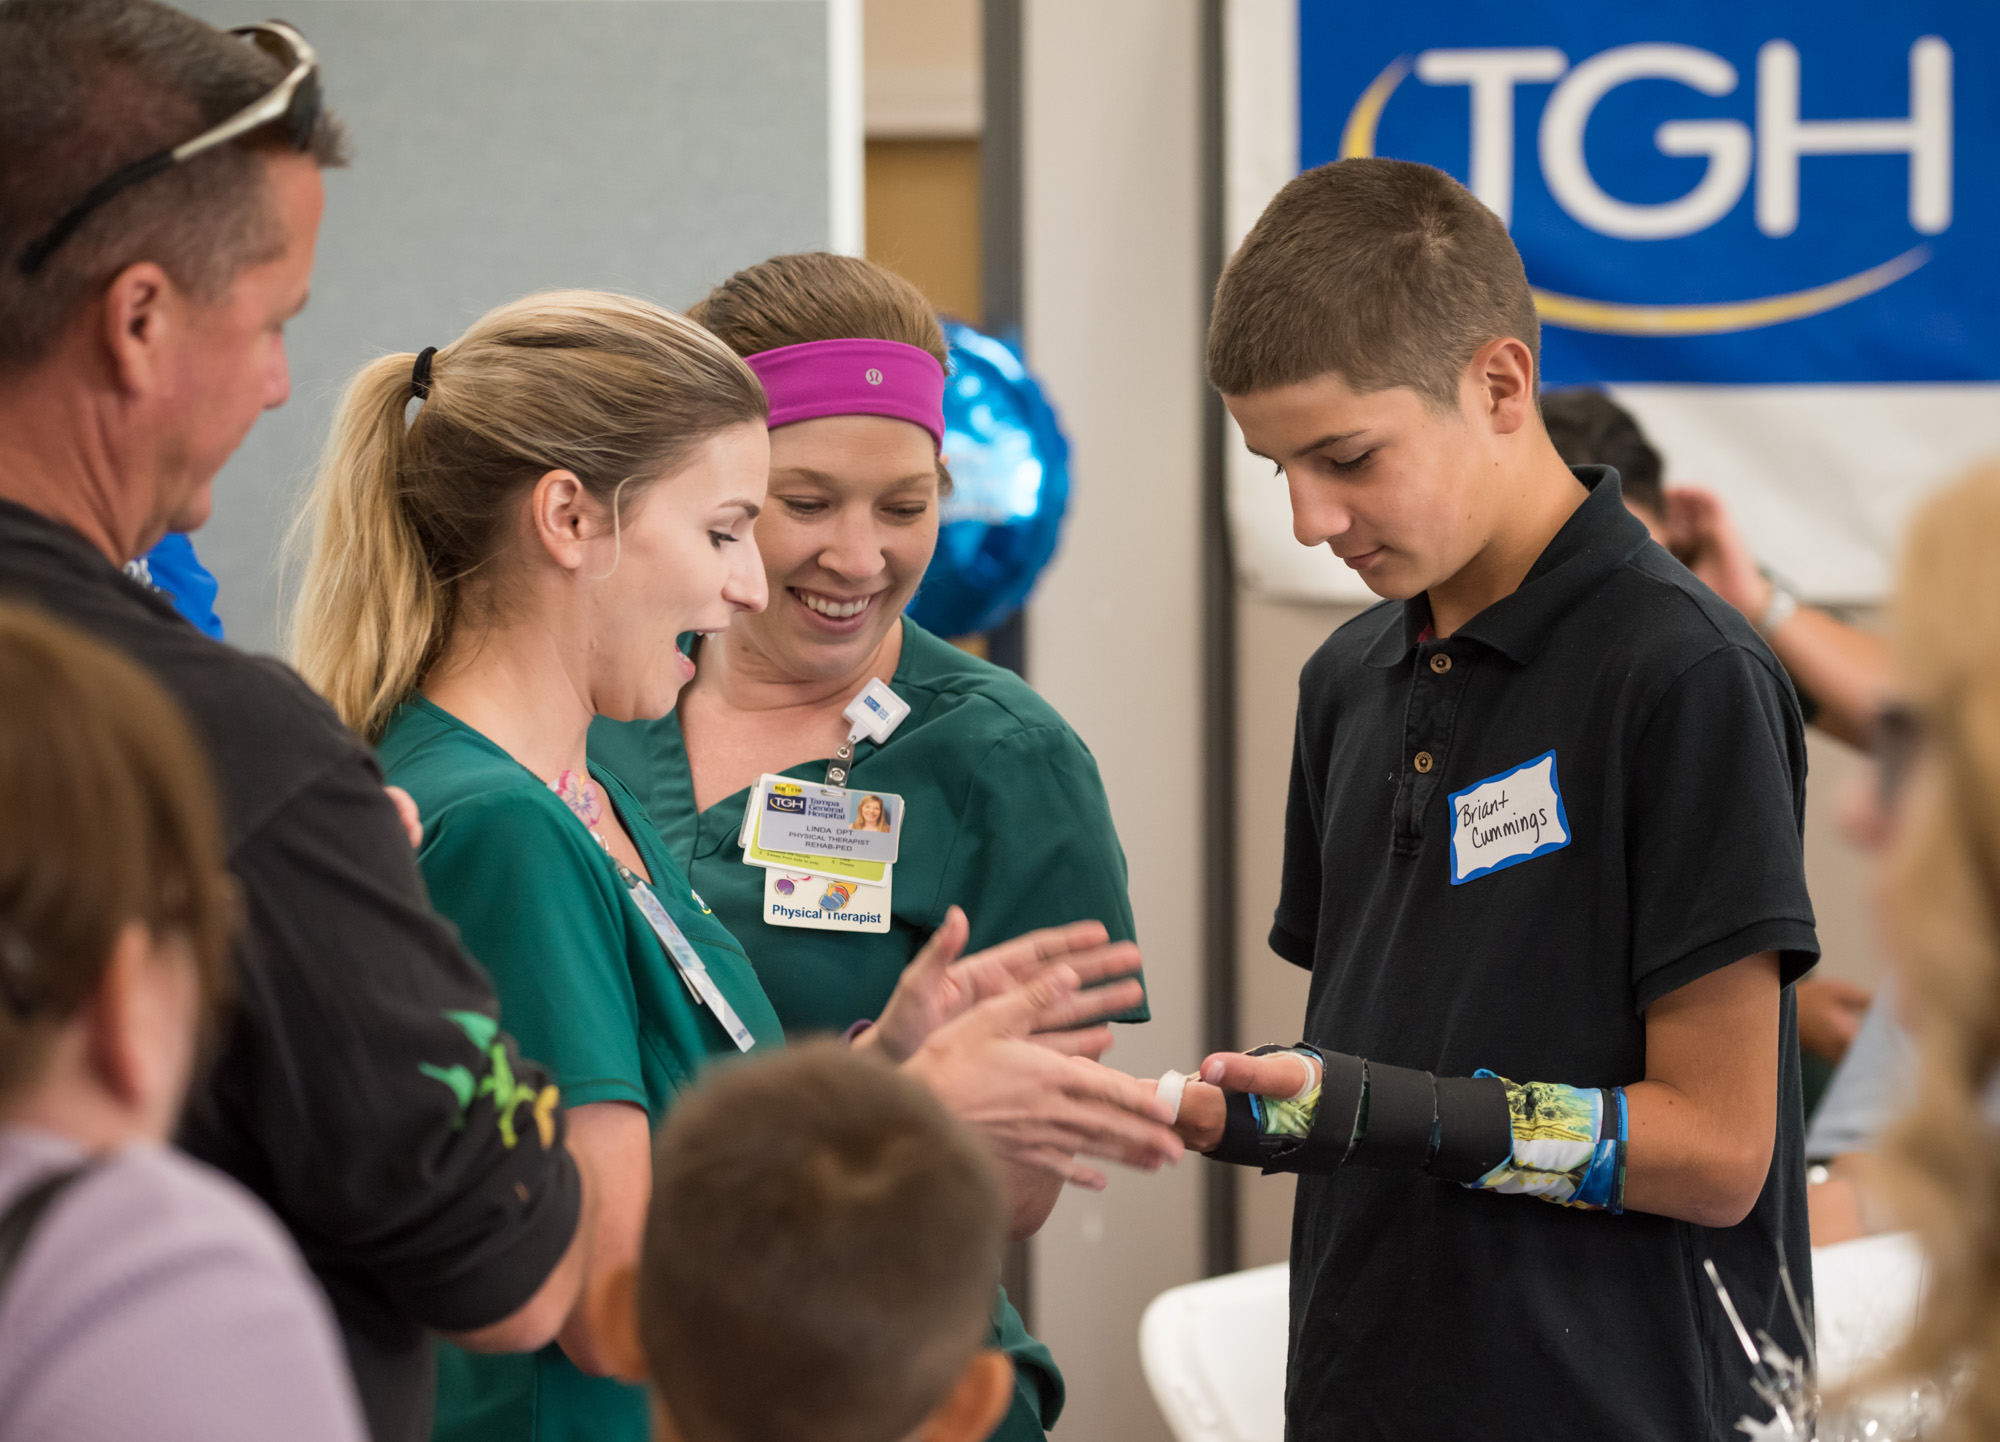 Two physical therapists looking at a young boy's injured arm at the trauma awareness luncheon